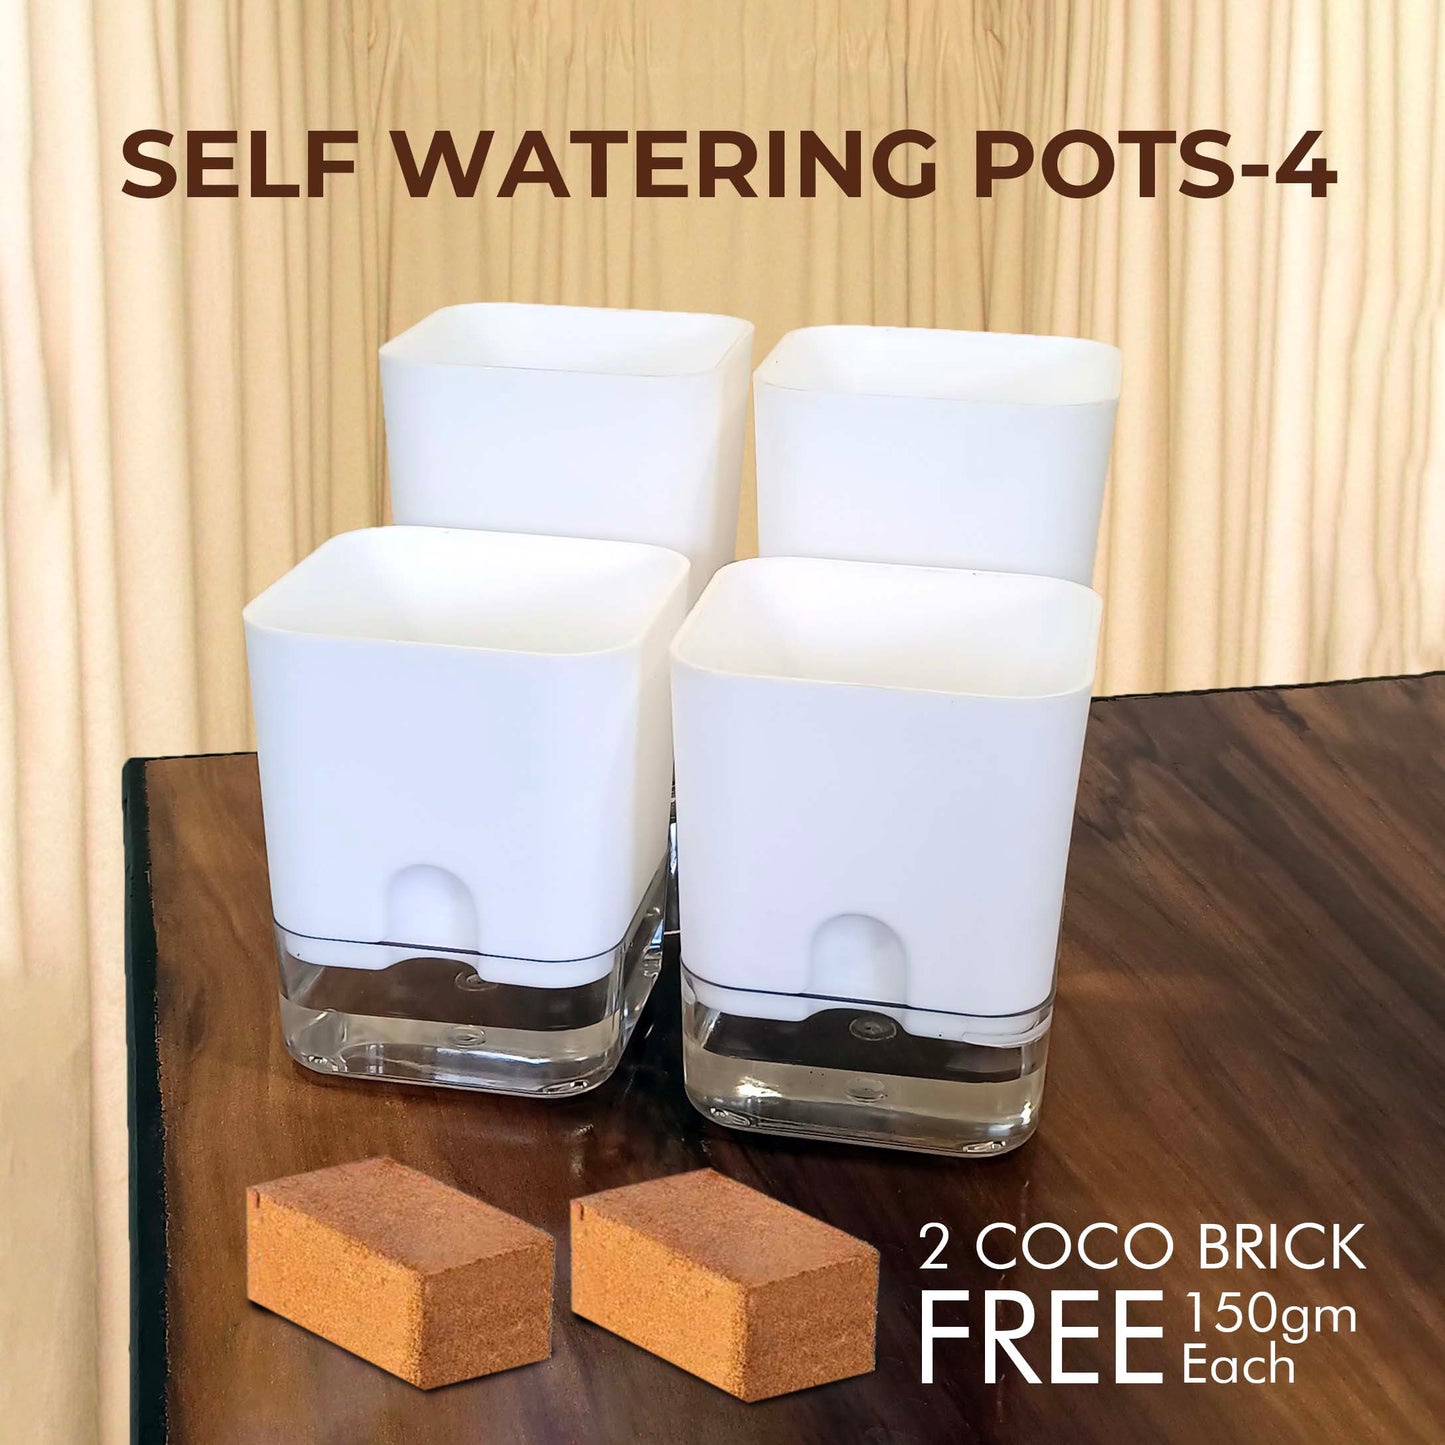 Casa De Amor Self Watering Pots for Indoor Plants | Home Decor, Living Room, Table Top | Plants not Included | 150gm Coco Brick Free